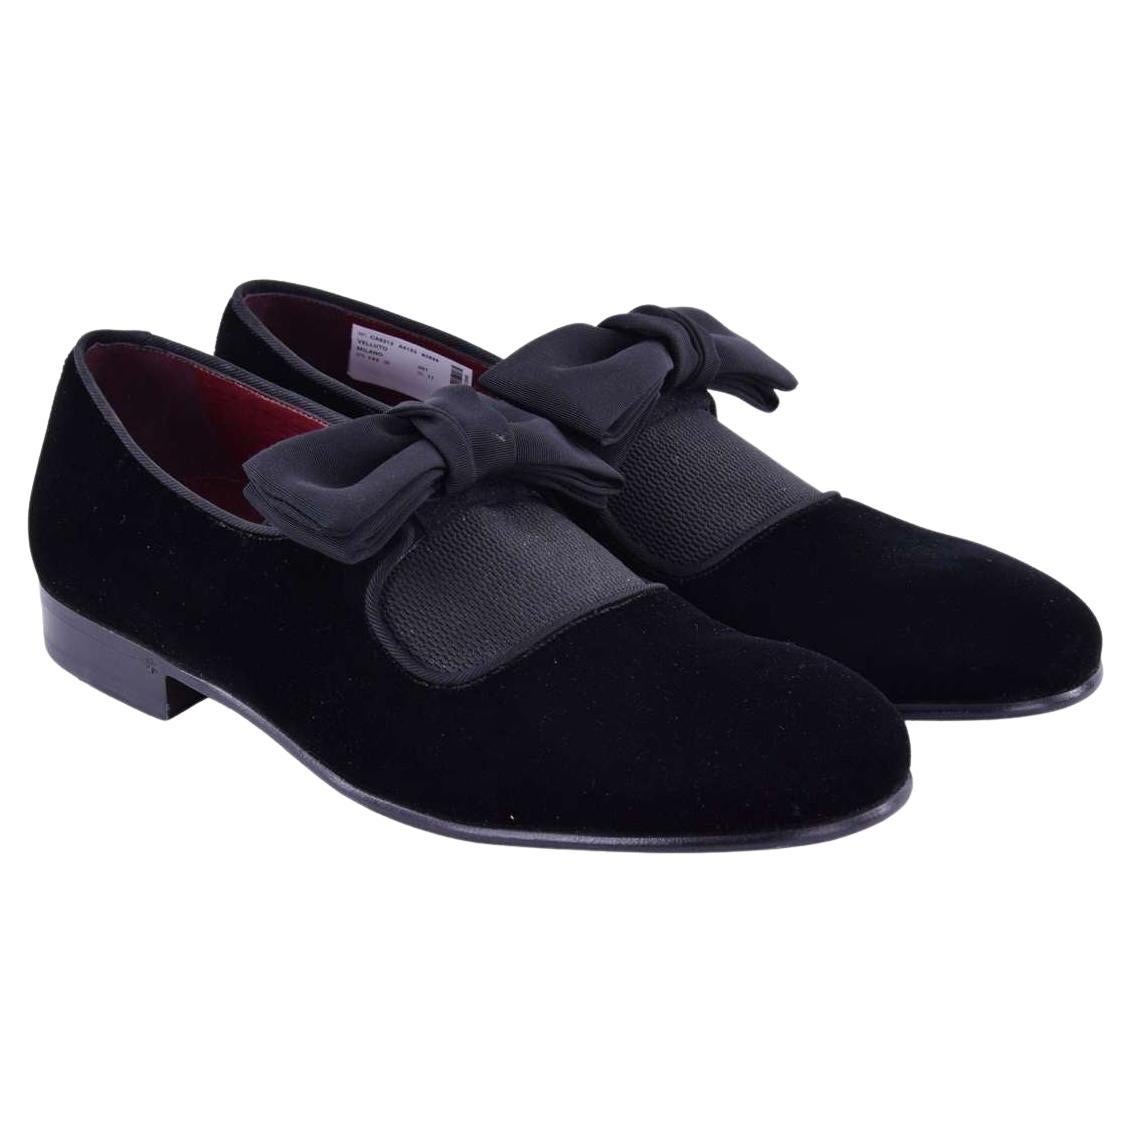 Dolce & Gabbana - Velour Slip-Ons MILANO with Bow Tie EUR 39.5 For Sale